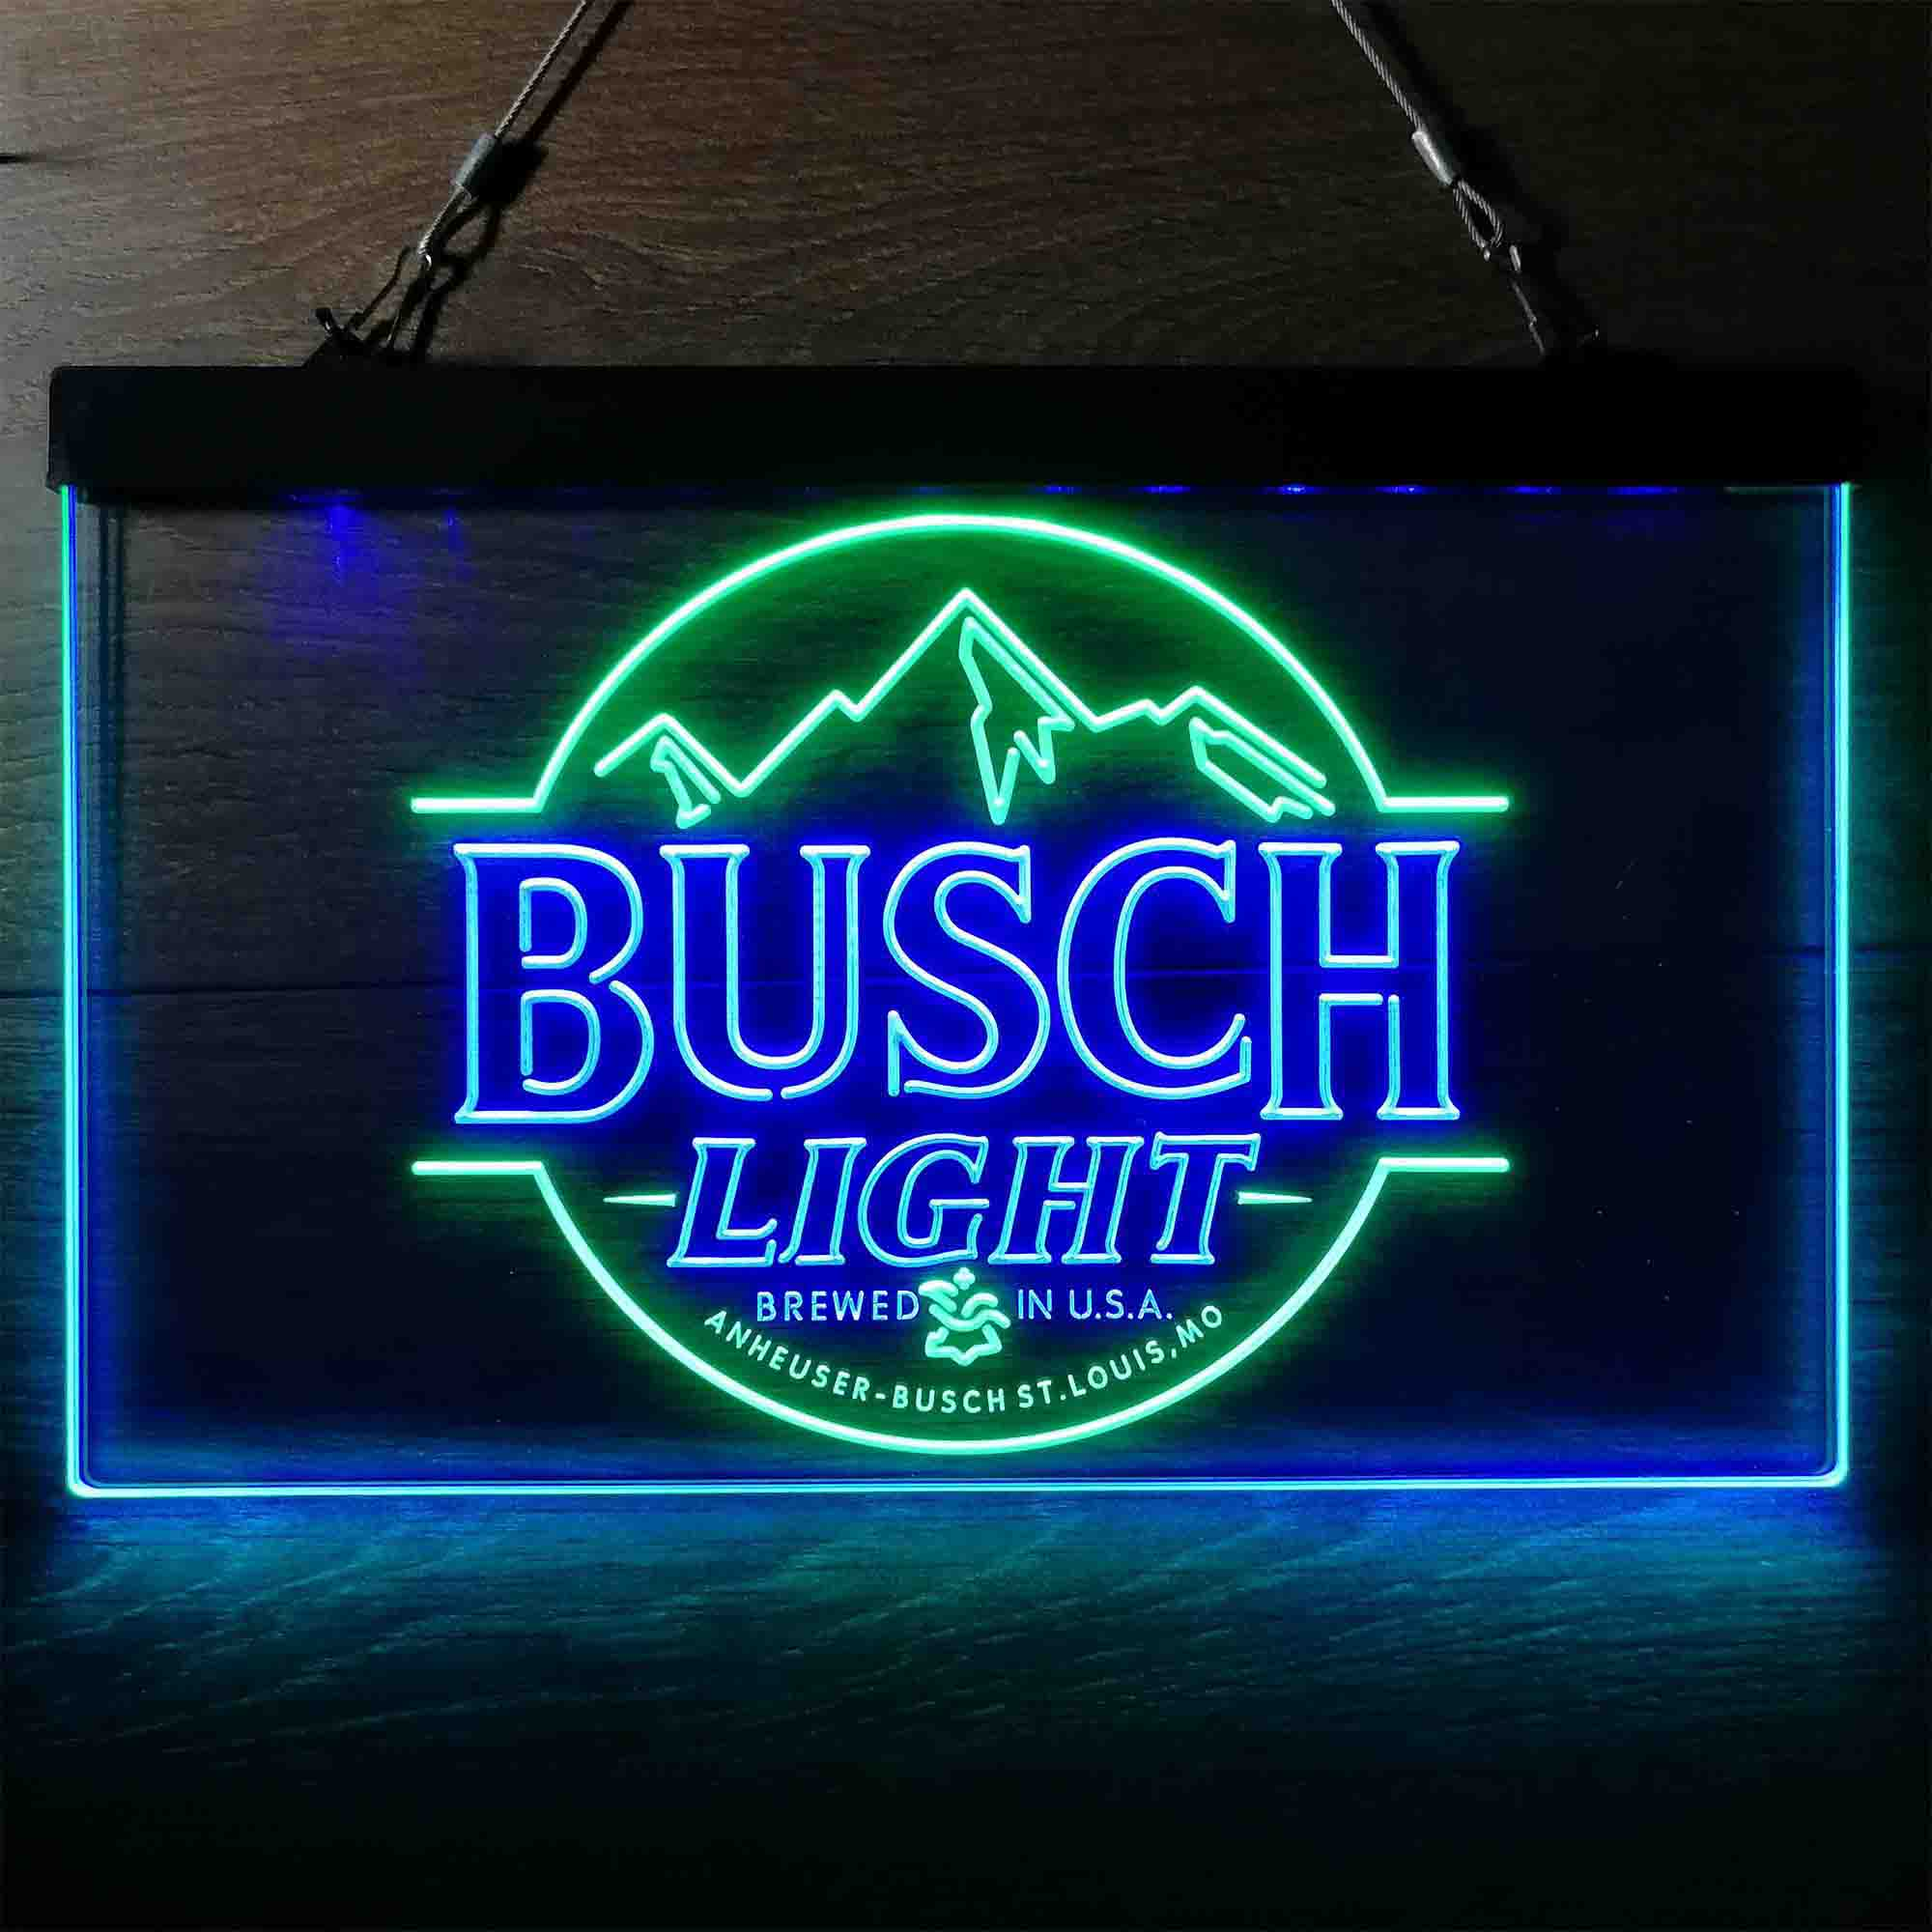 Check Out The Amazing Busch Light Neon Sign